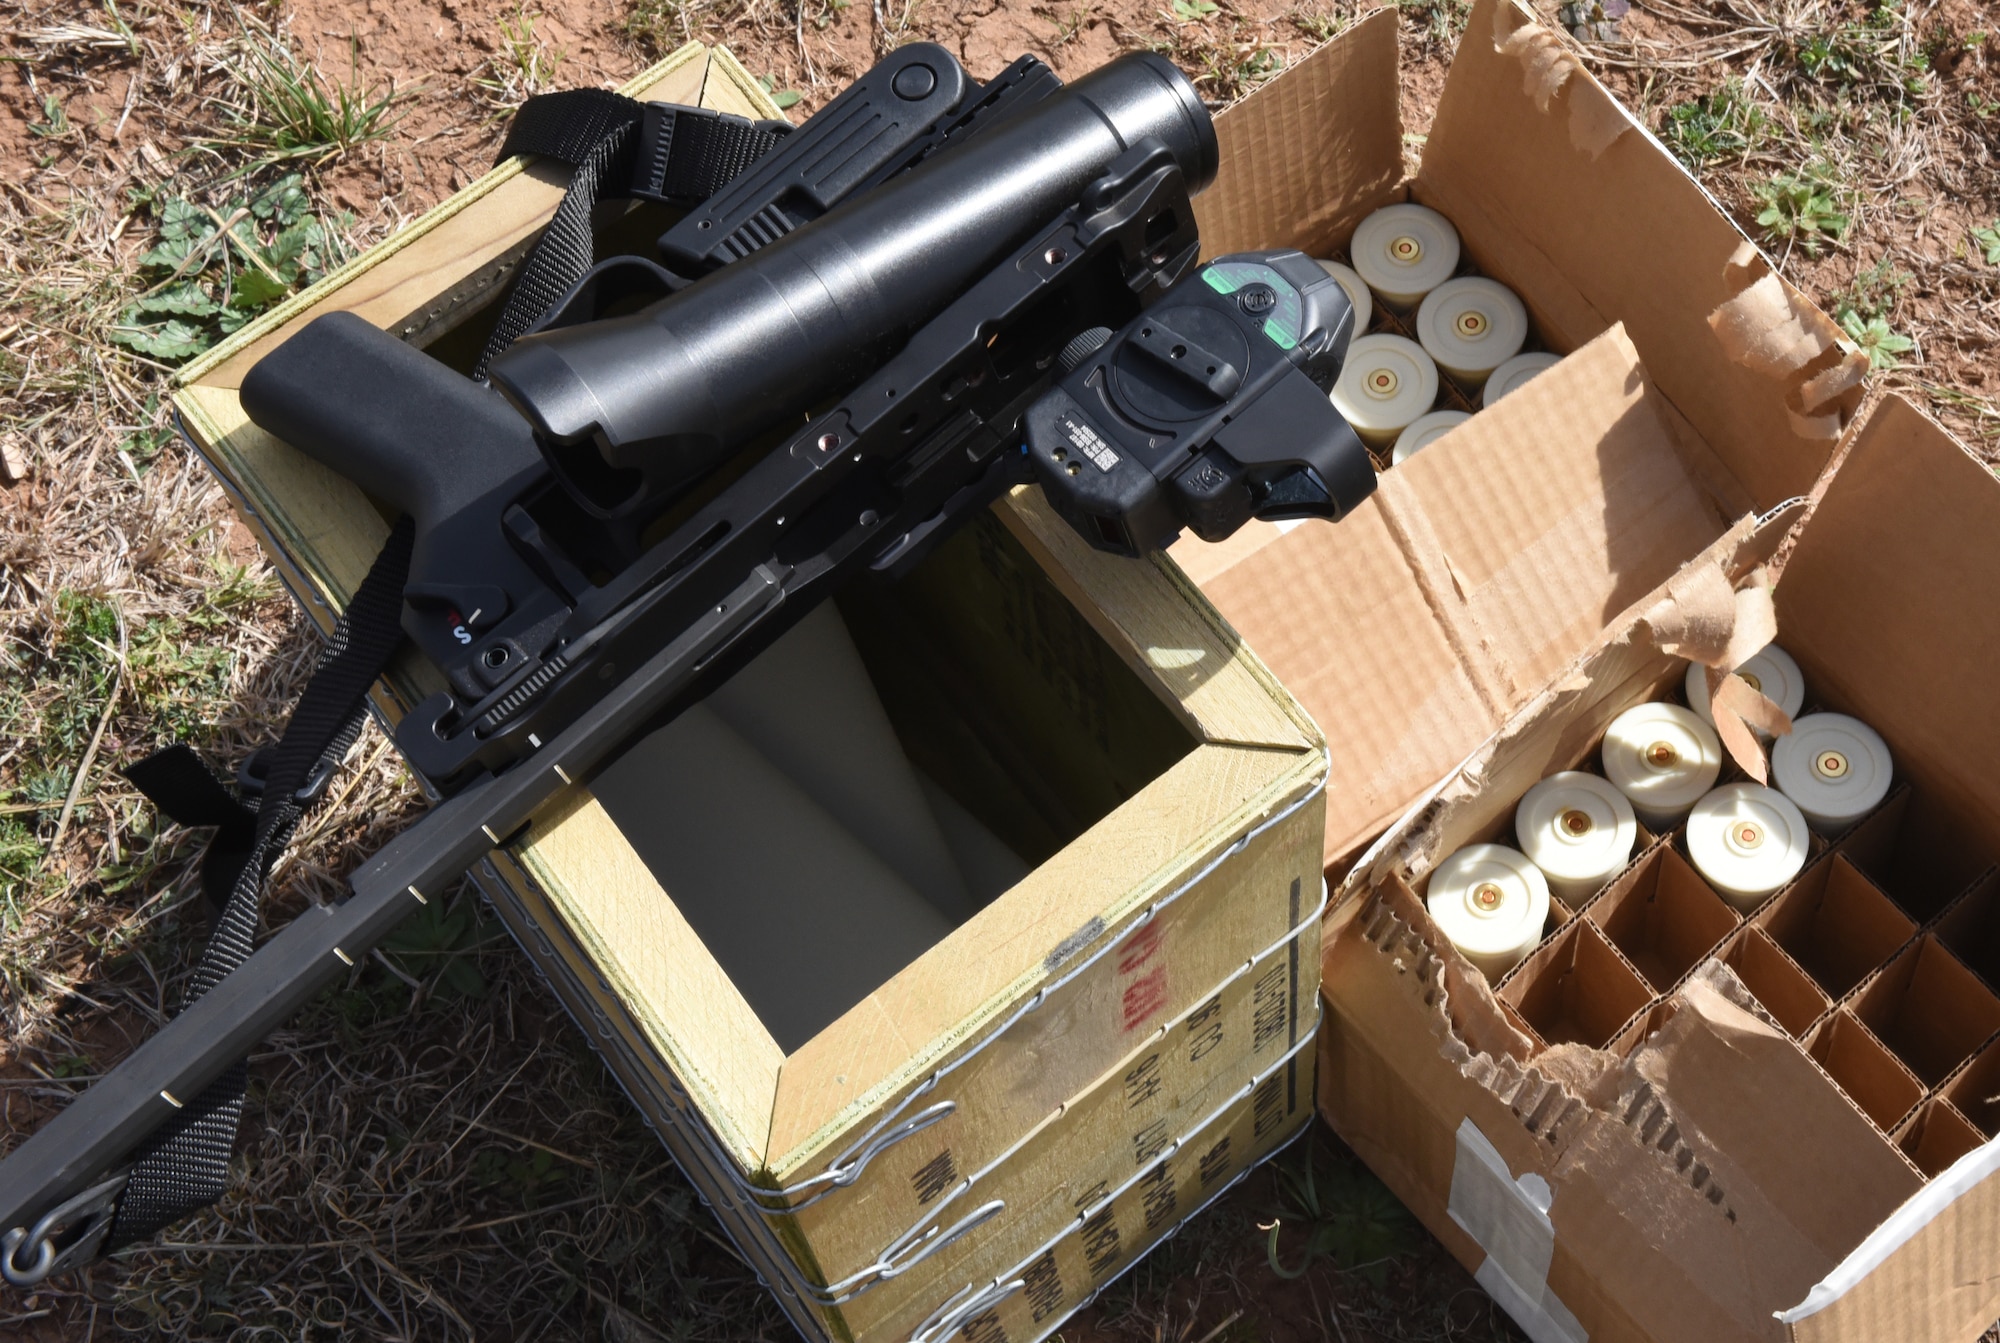 An M320 grenade launcher rests on a crate with ammunition for a demonstration at the San Angelo Police Department firing range, Texas, Feb. 15, 2019. During the demo Goodfellow members used pellet rounds, a sponge round and other non-lethal rounds. (U.S. Air Force photo by Airman 1st Class Isiah Jacobs/Released)